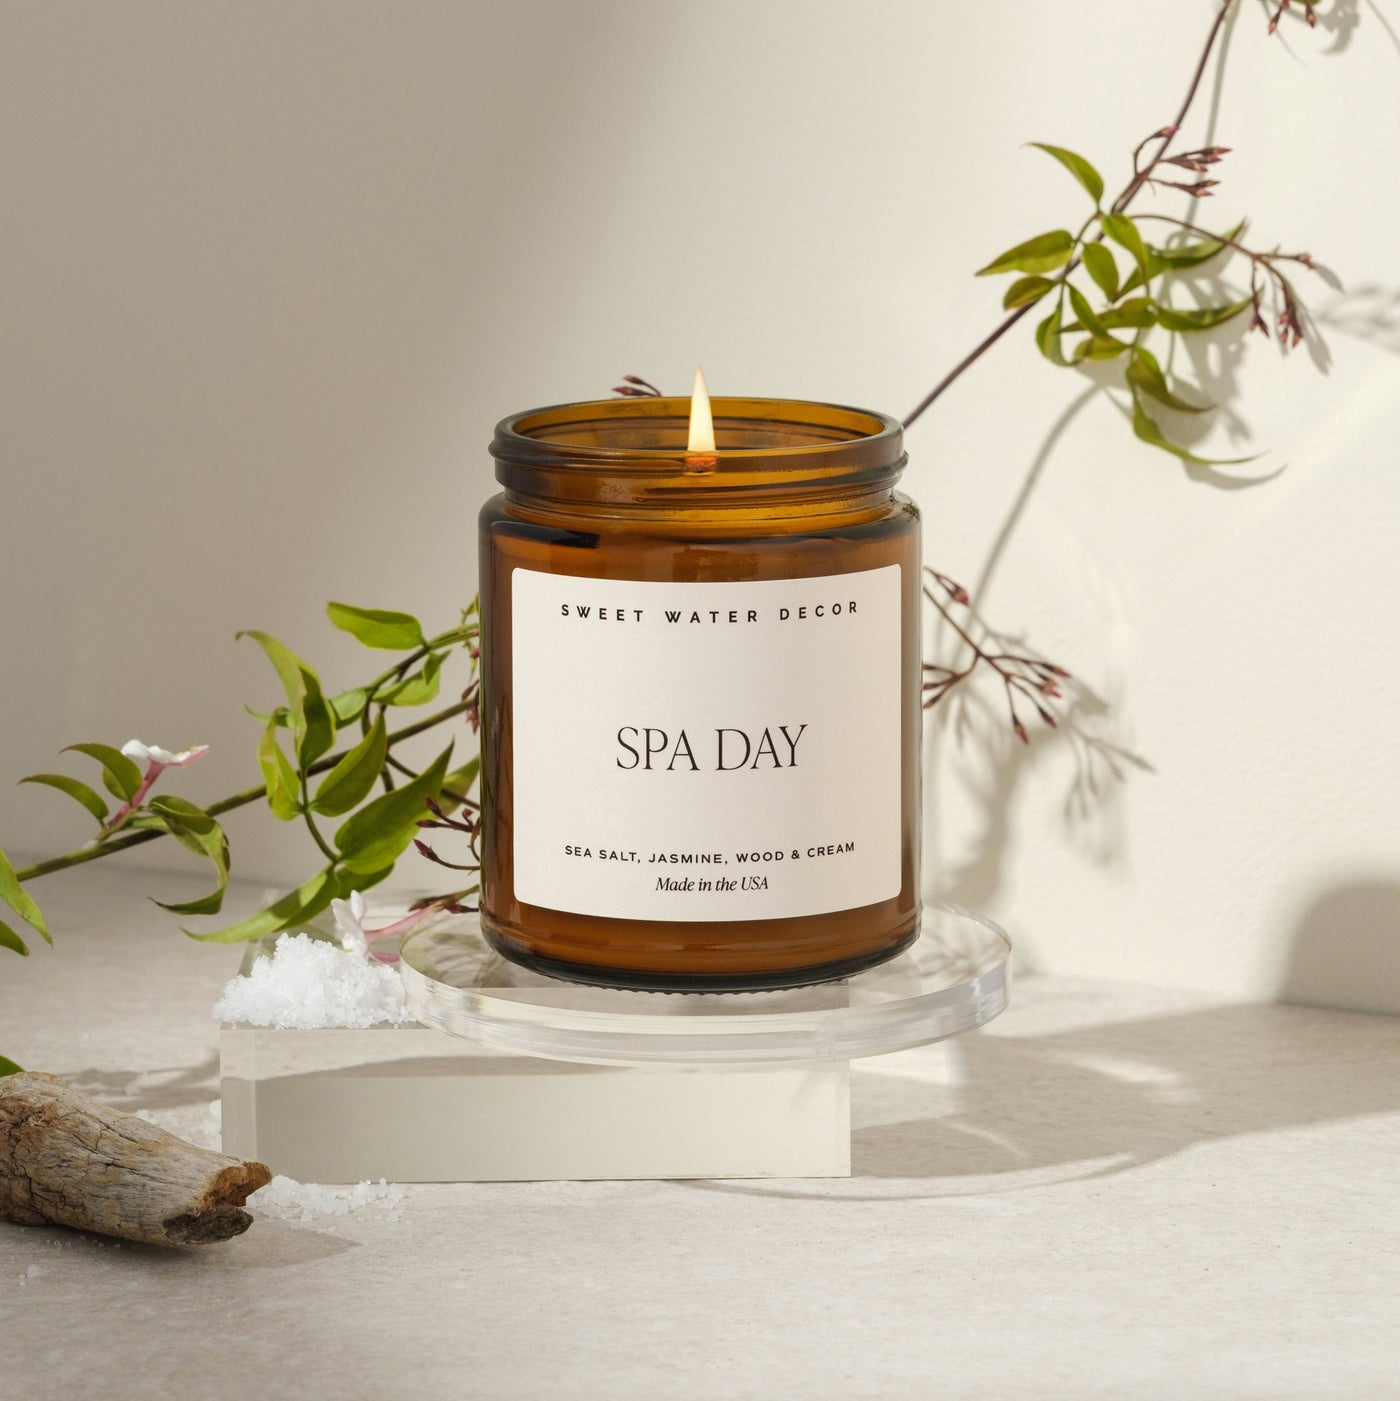 Spa Day Soy Candle - Amber Jar - 9 oz - Sweet Water Decor - Candles